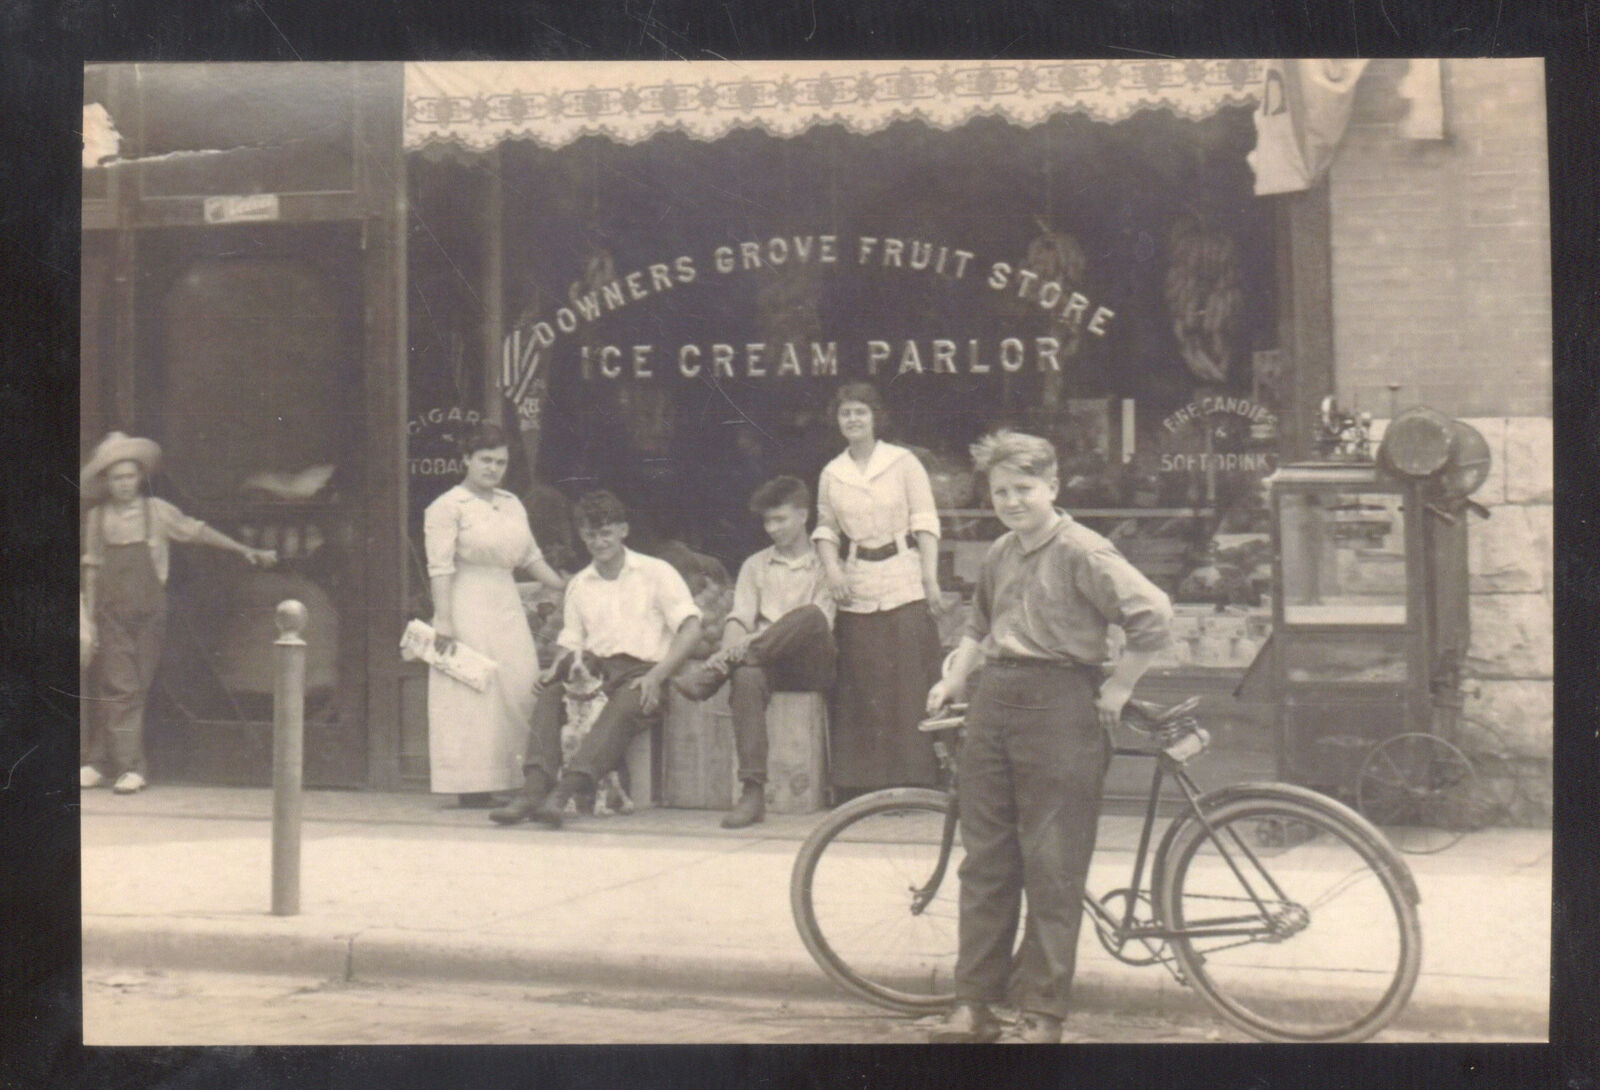 REAL PHOTO DOWNERS GROVE ILLINOIS DOWNTOWN ICE CREAM PARLOR POSTCARD COPY